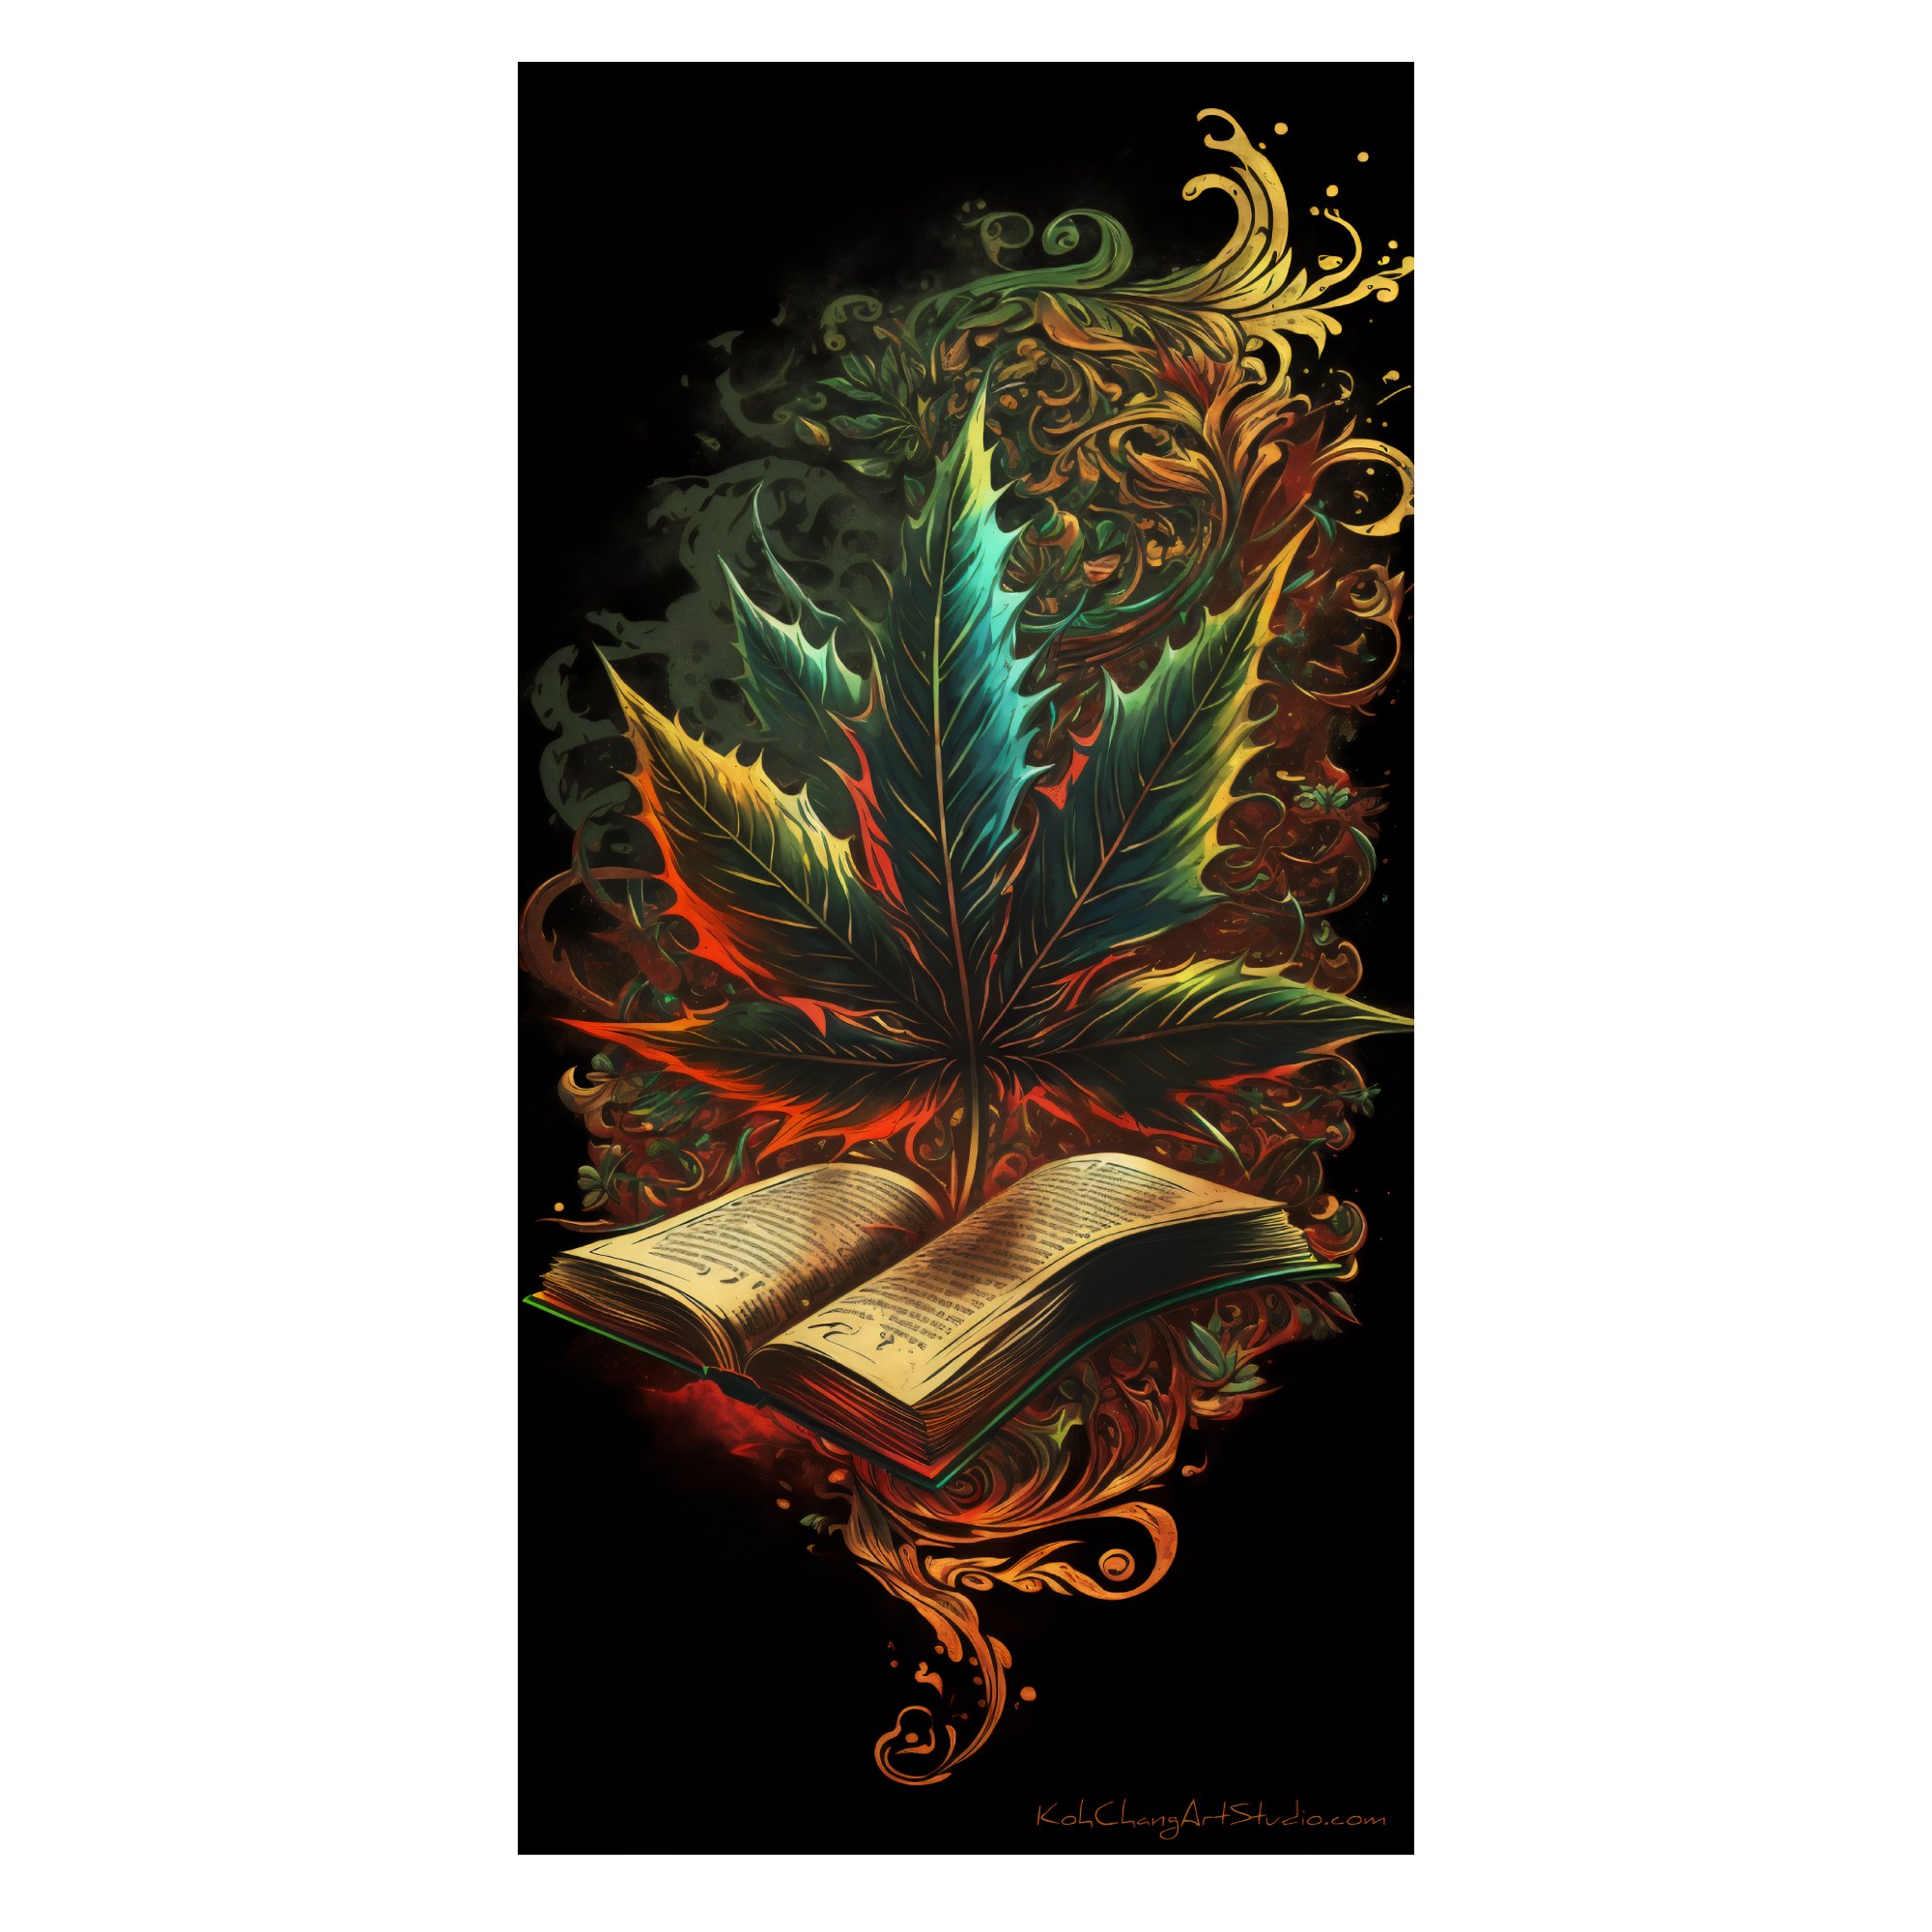 ALMANACH Art Illustration - A leaf steeped in tales, representing the wisdom and stories of the earth.